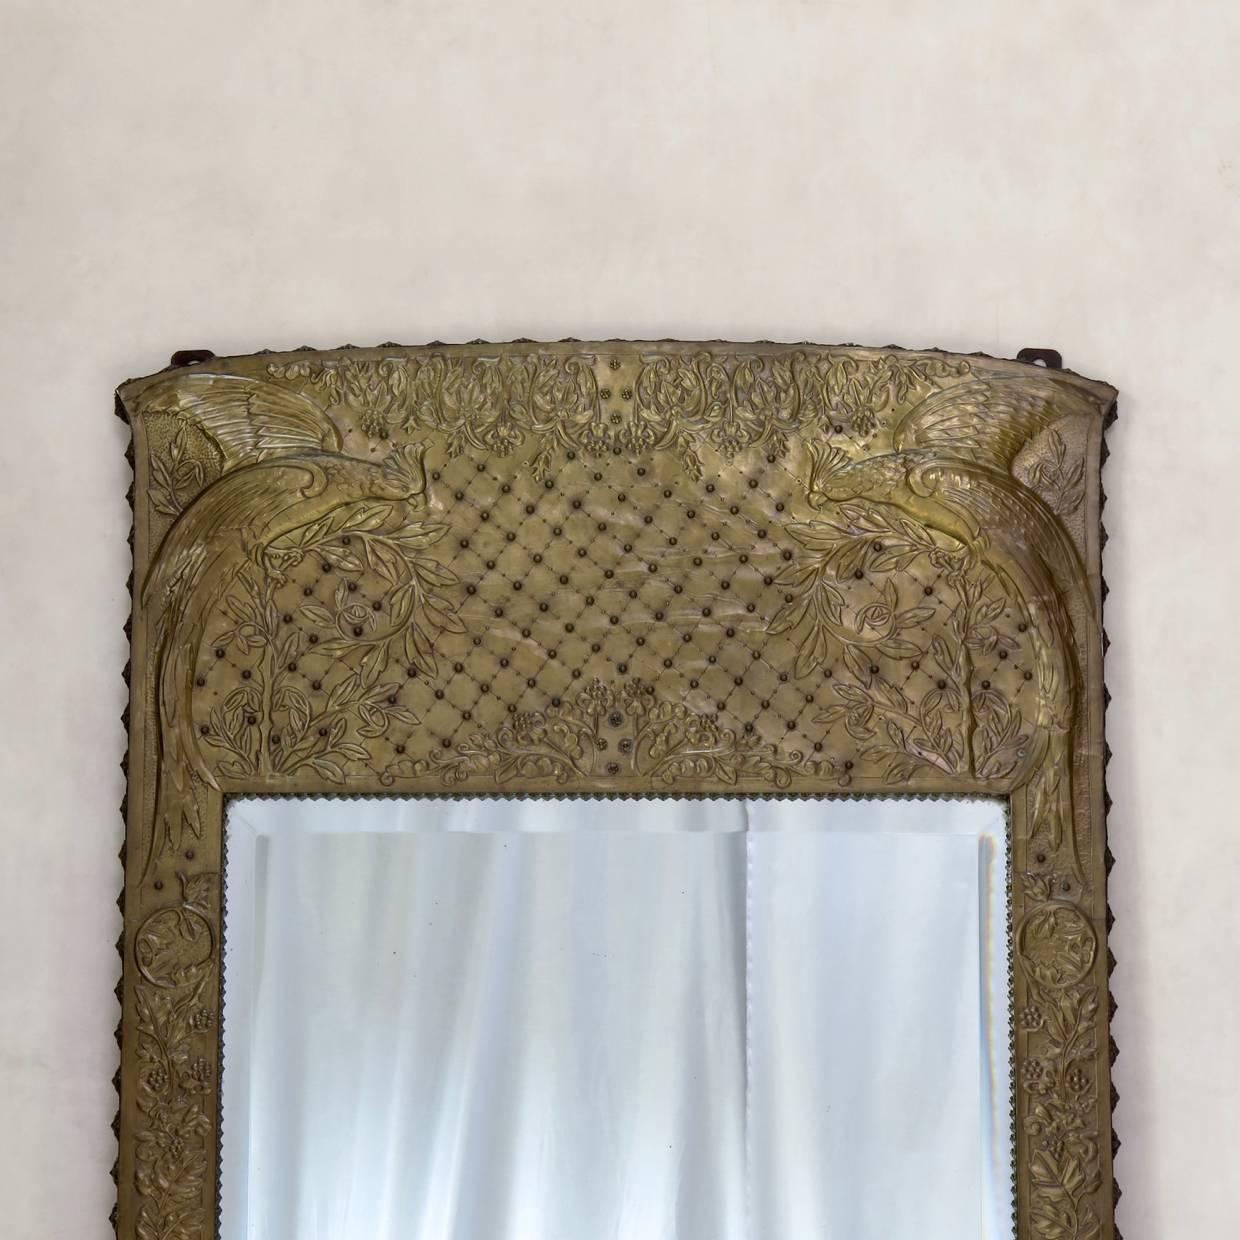 Elegant mirror with an unusual frame of repousse copper decorated with birds and foliage. The frame is signed 